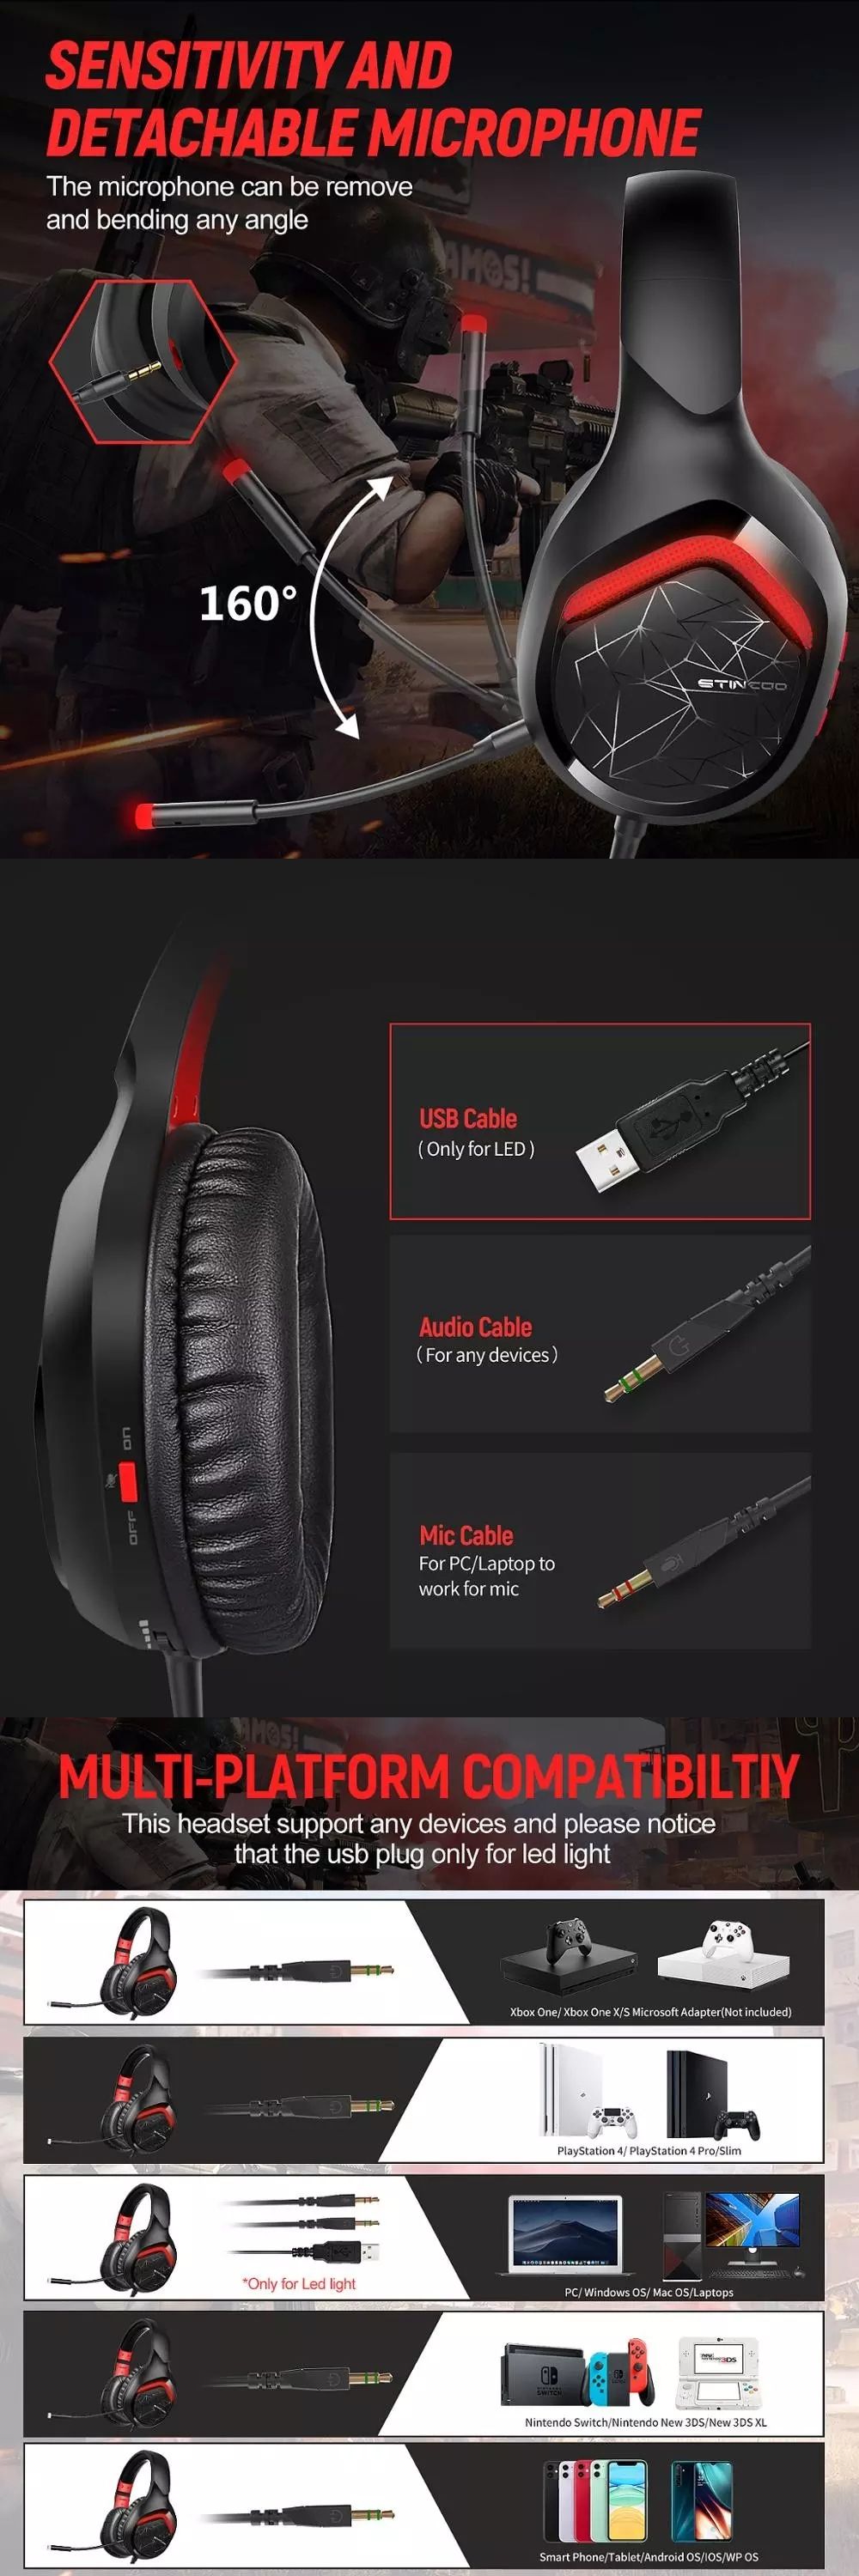 SOMIC-GS301-Game-Headset-71-Channel-USB-35mm-Bass-Stereo-Wired-Gamer-Earphone-Microphone-Headphones--1696322